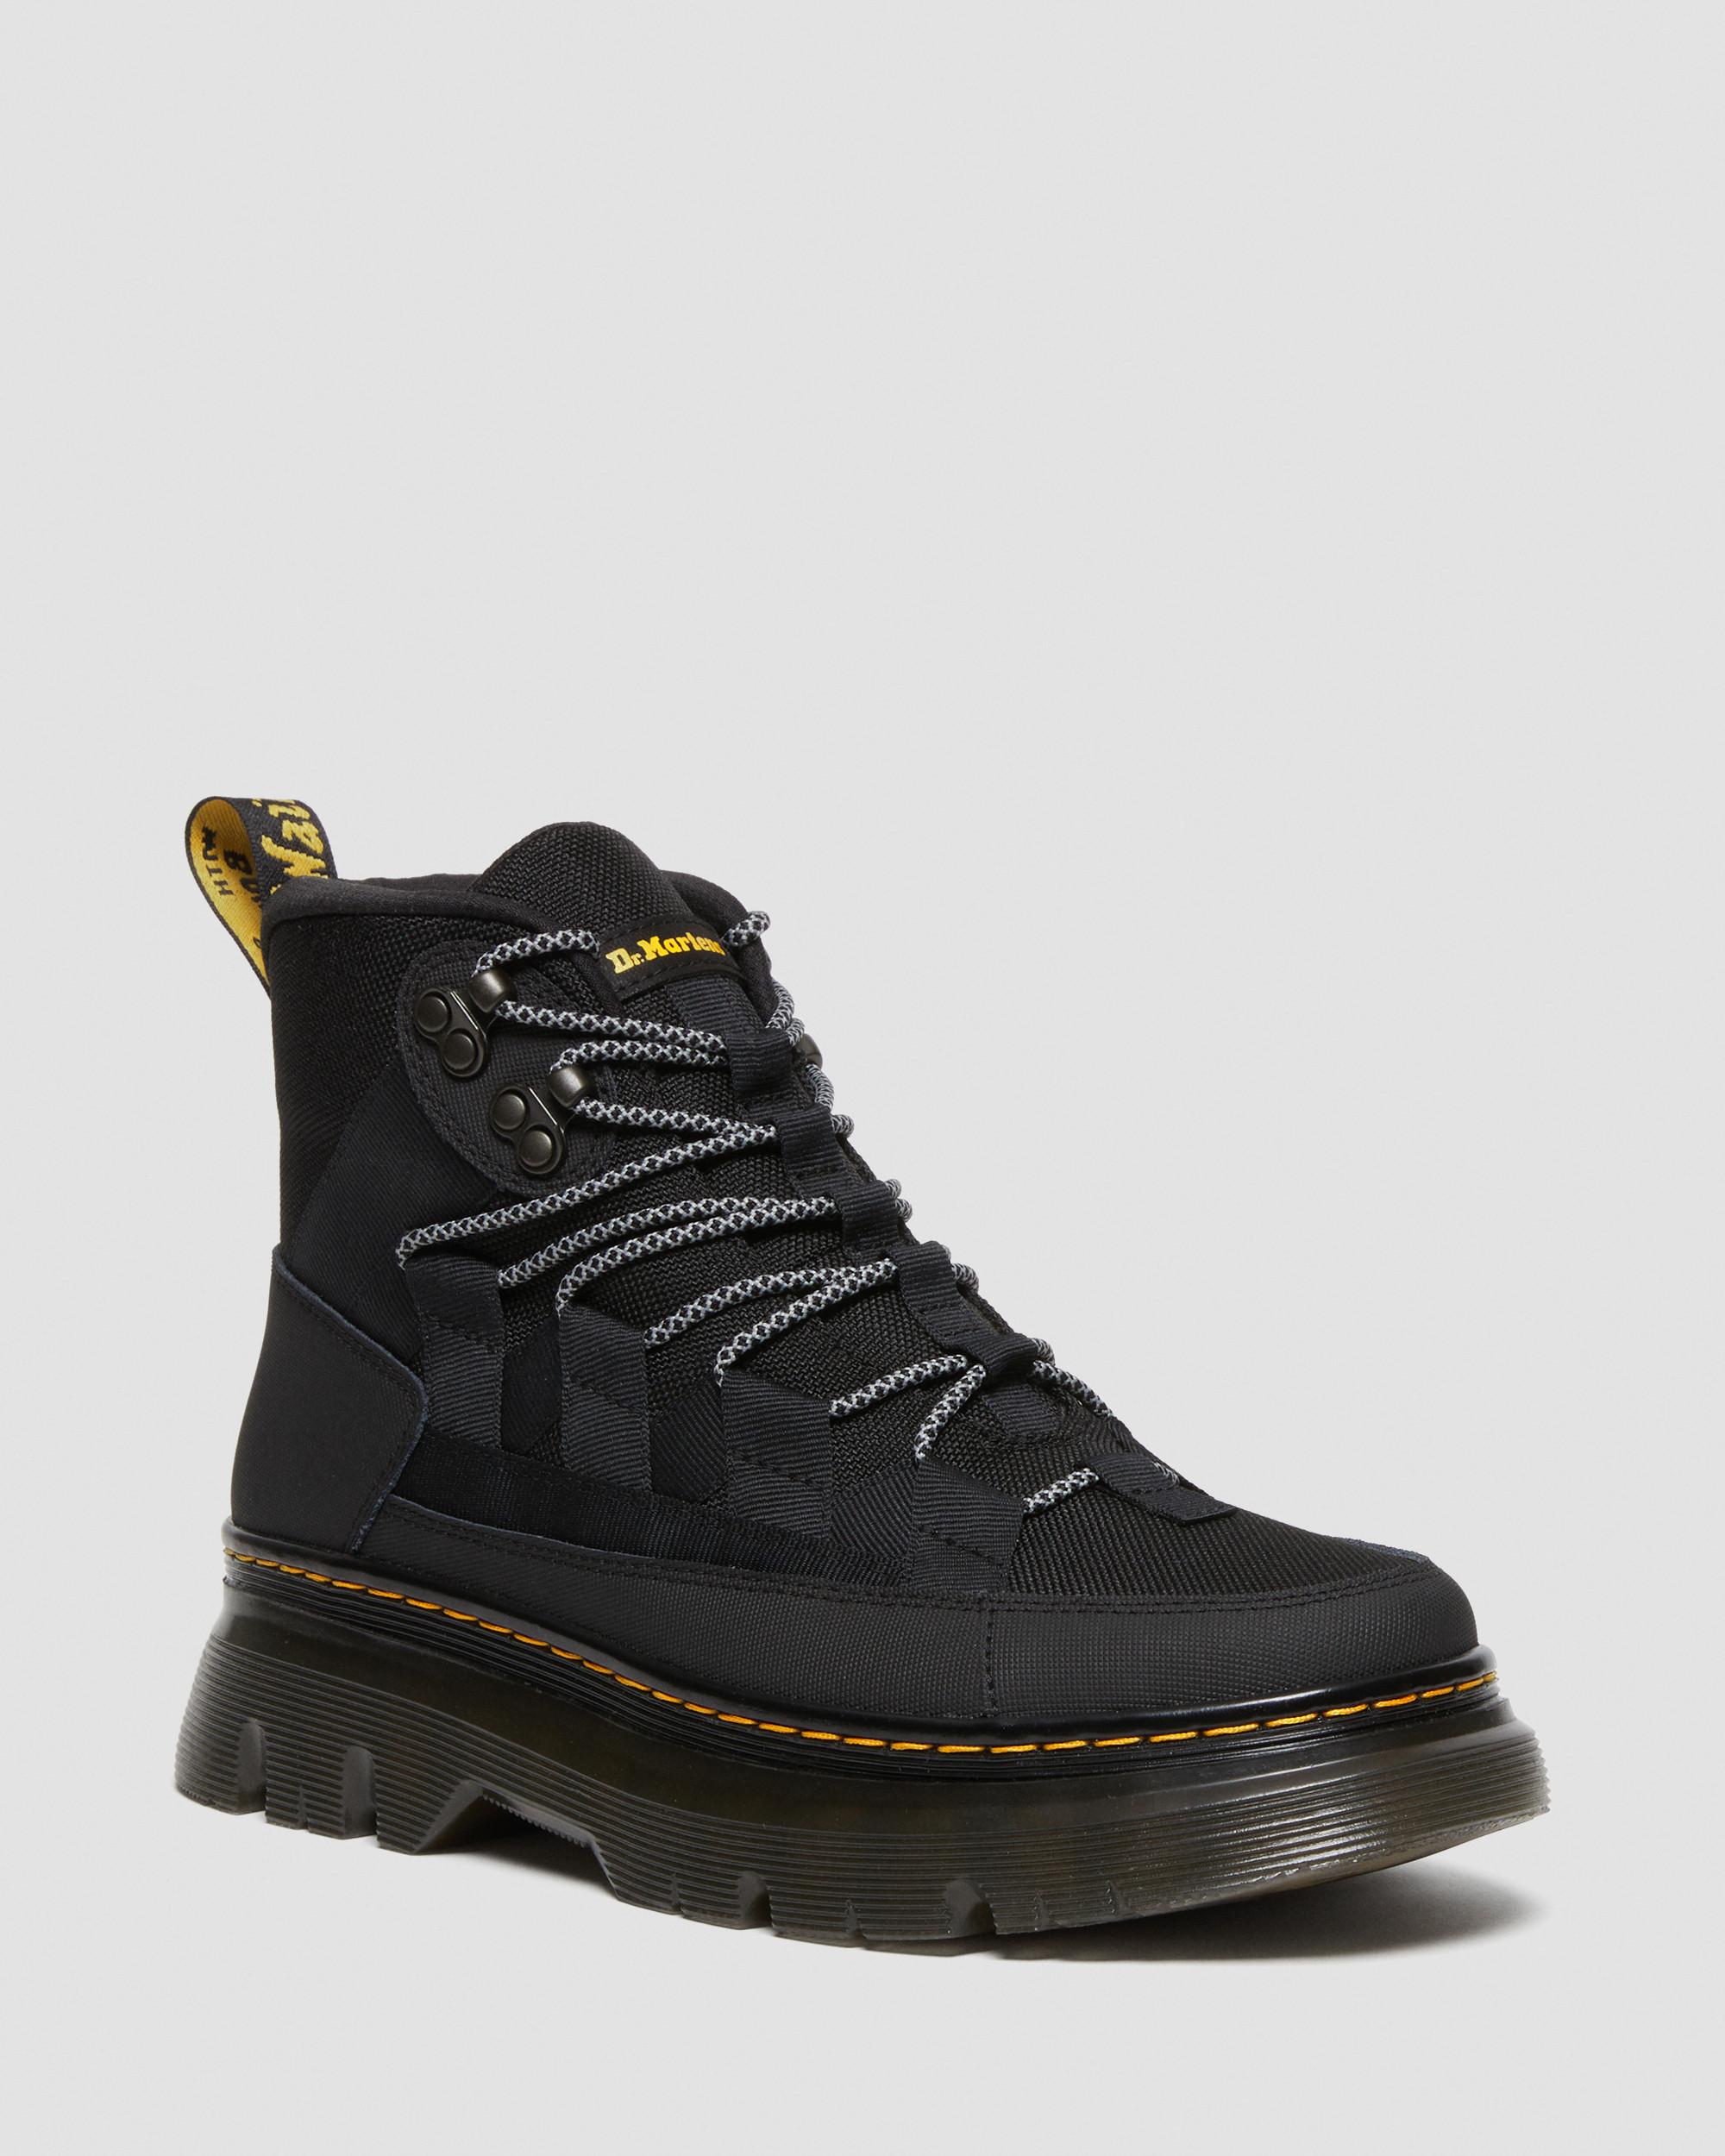 Boury Extra Tough Leather Utility Boots in Black